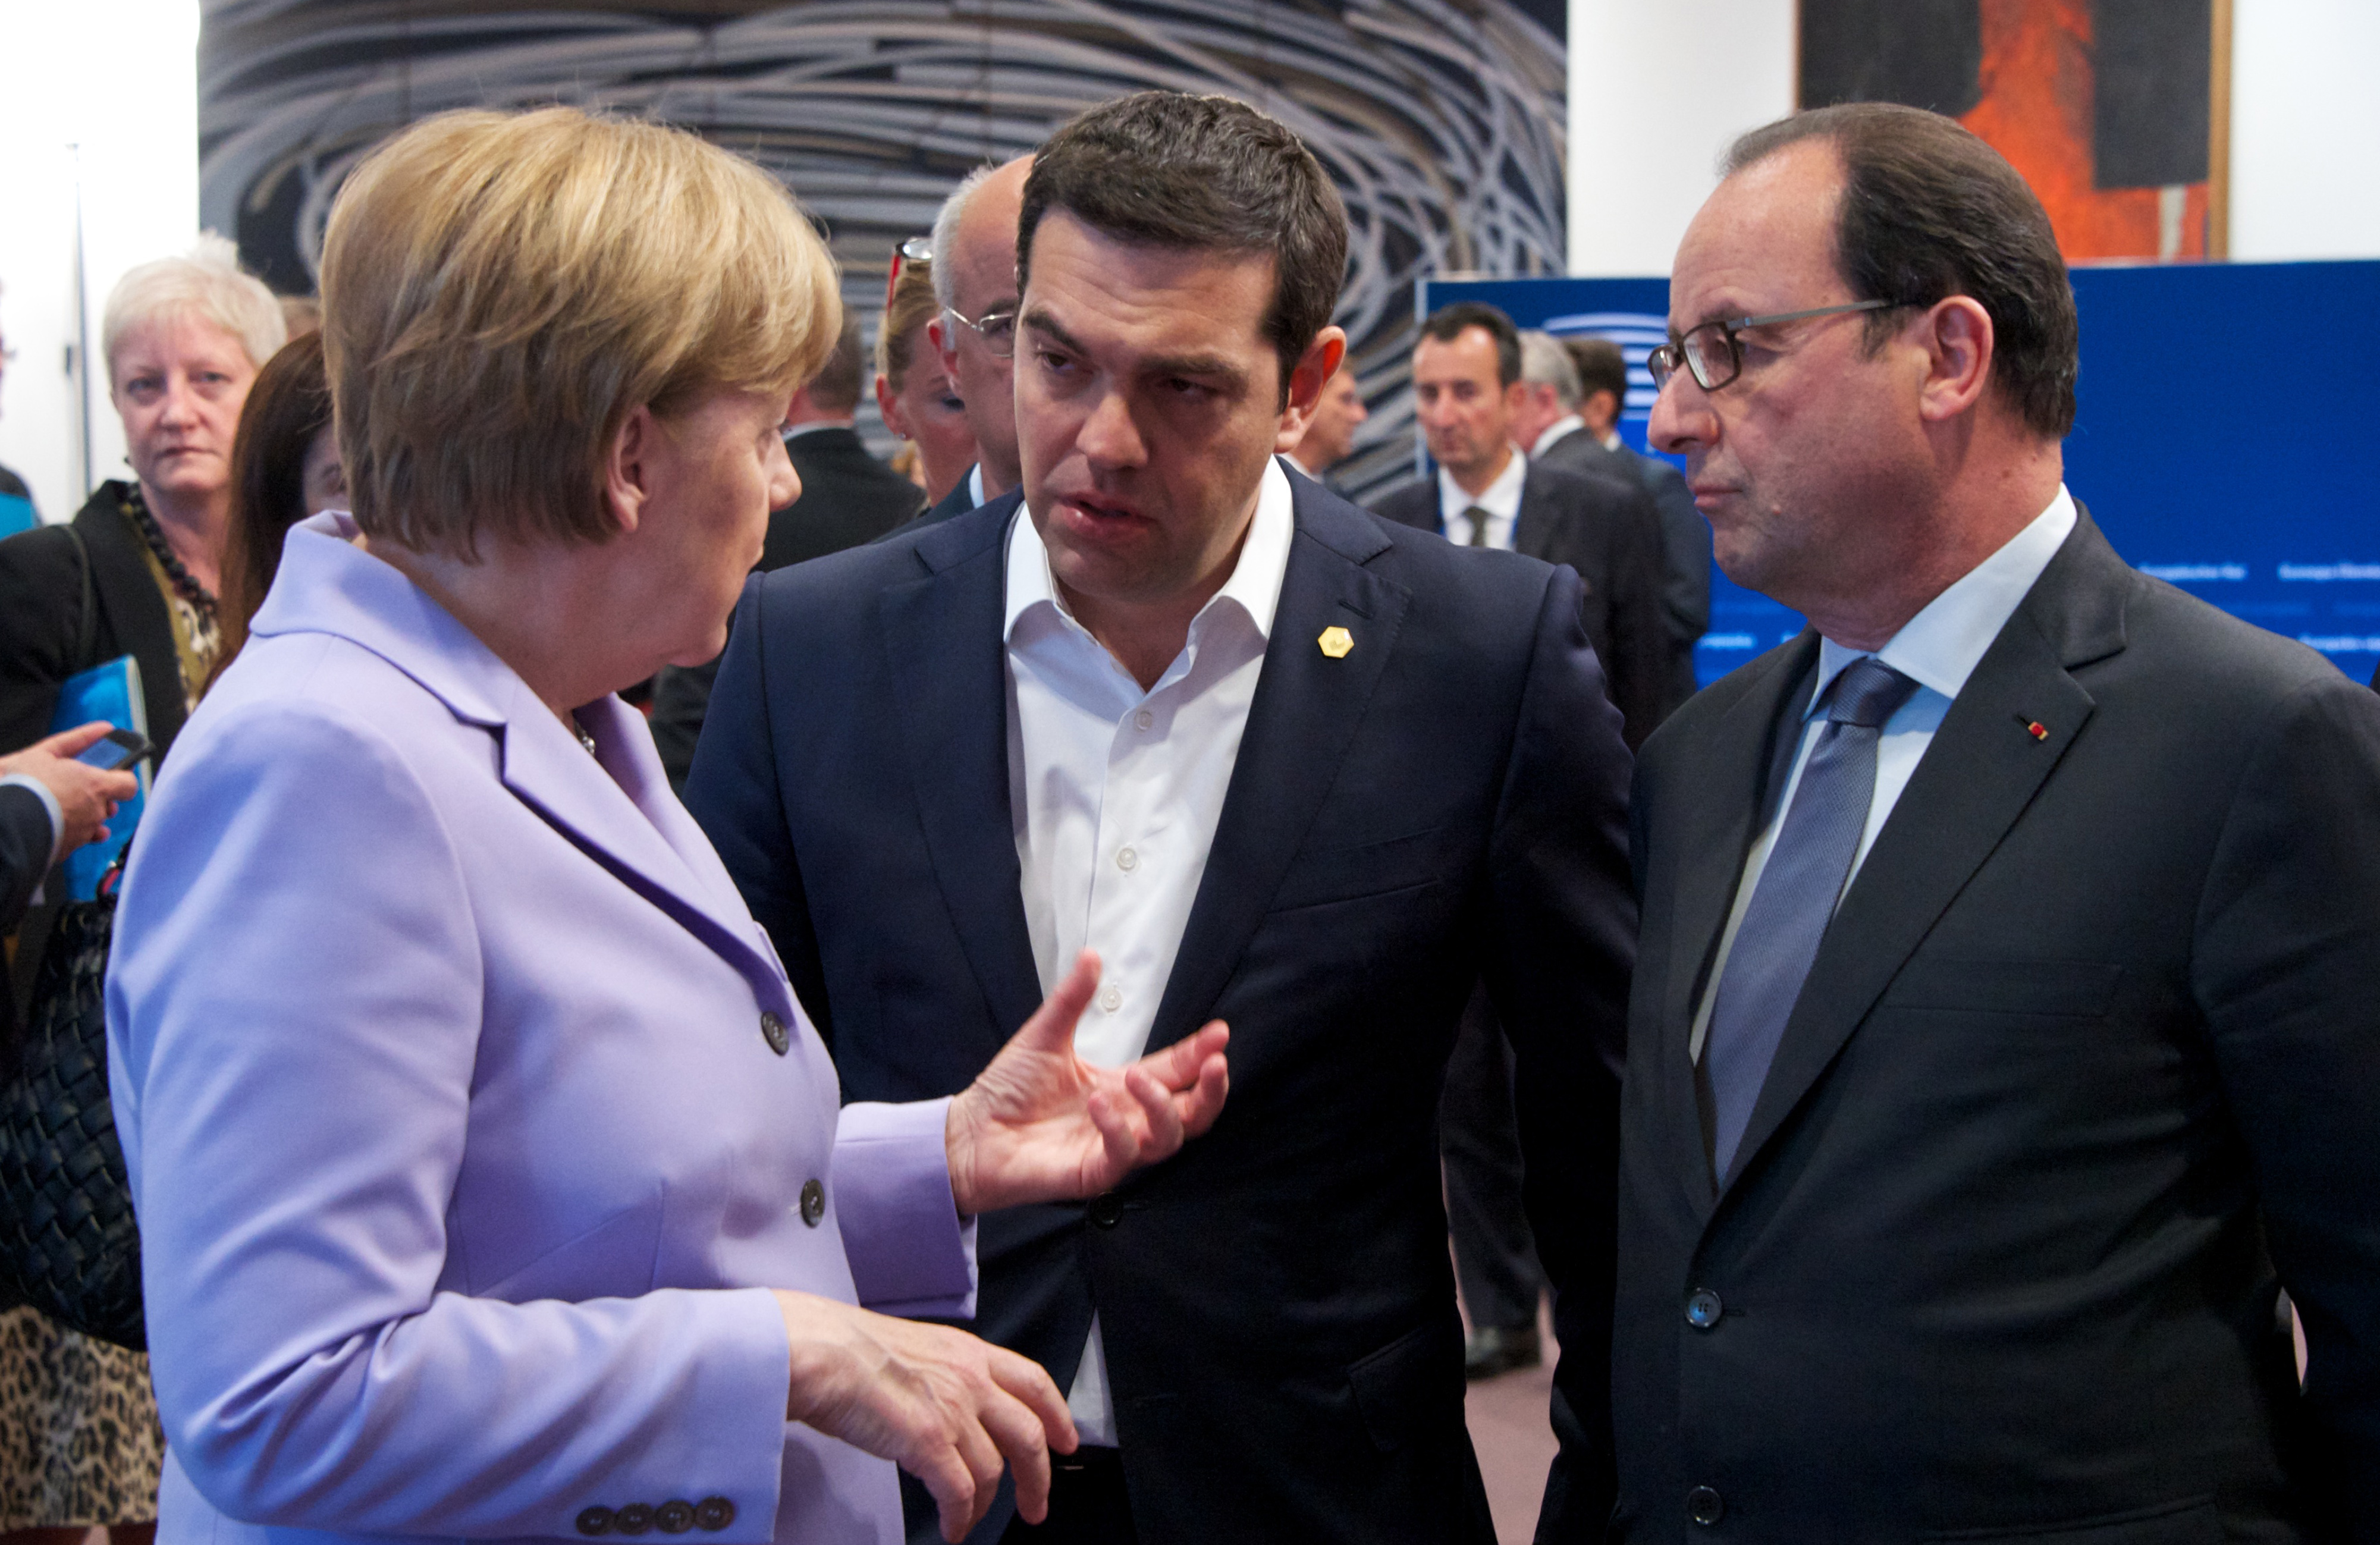 Grexit or a third bailout with four-month bridge program